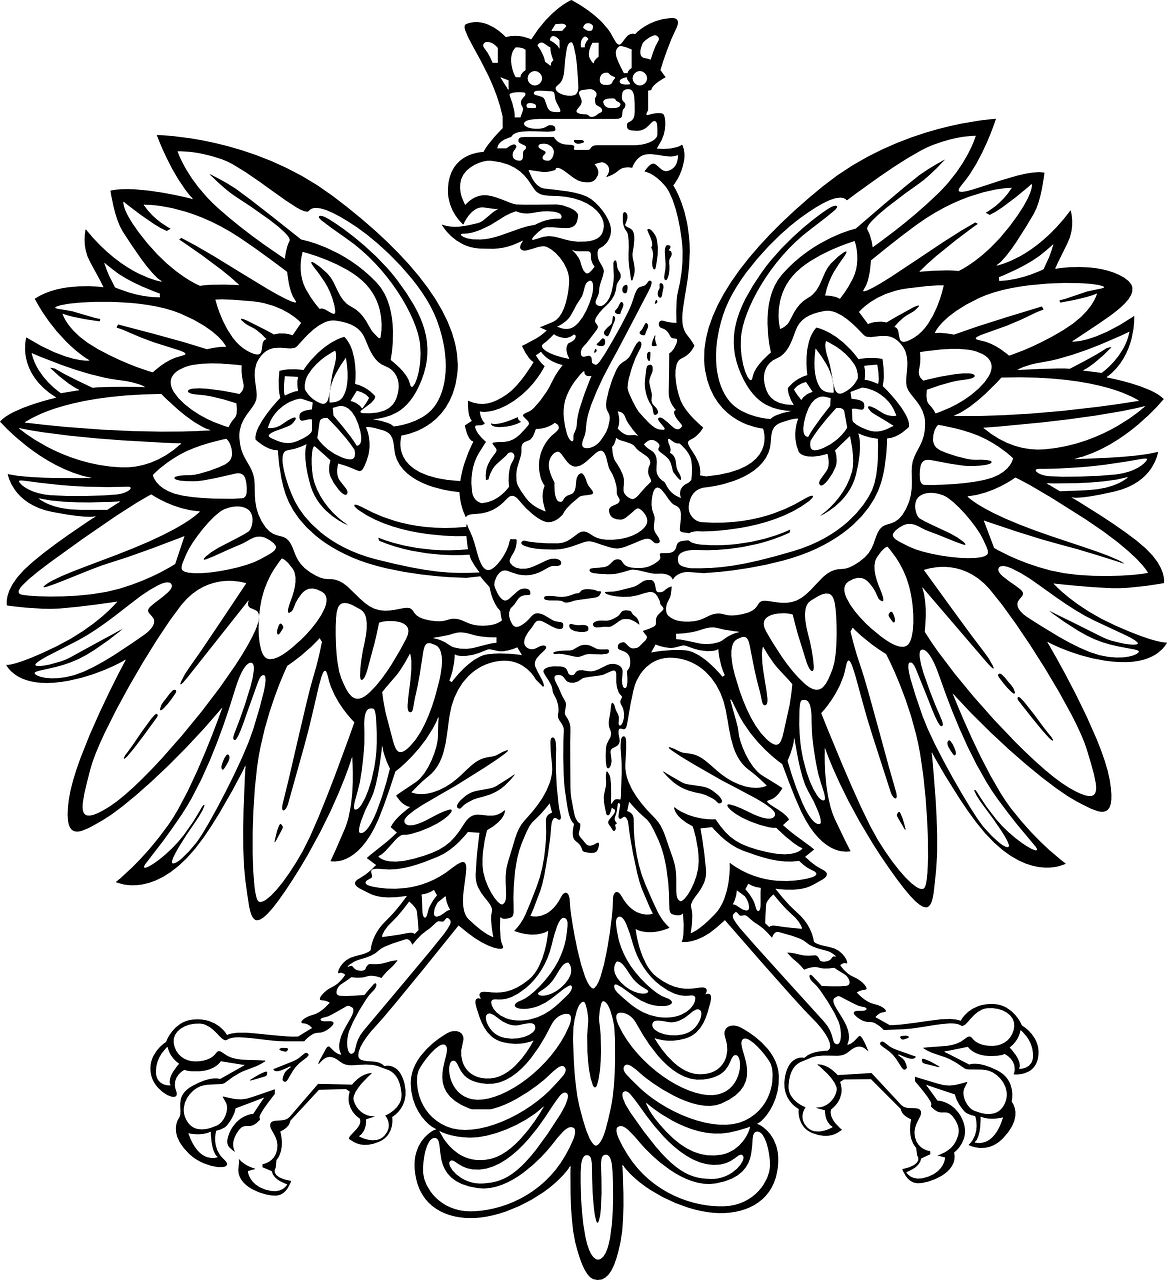 poland,coat of arms,white eagle,eagle,crowned,polish,bird,coat,arms,national,free vector graphics,free pictures, free photos, free images, royalty free, free illustrations, public domain